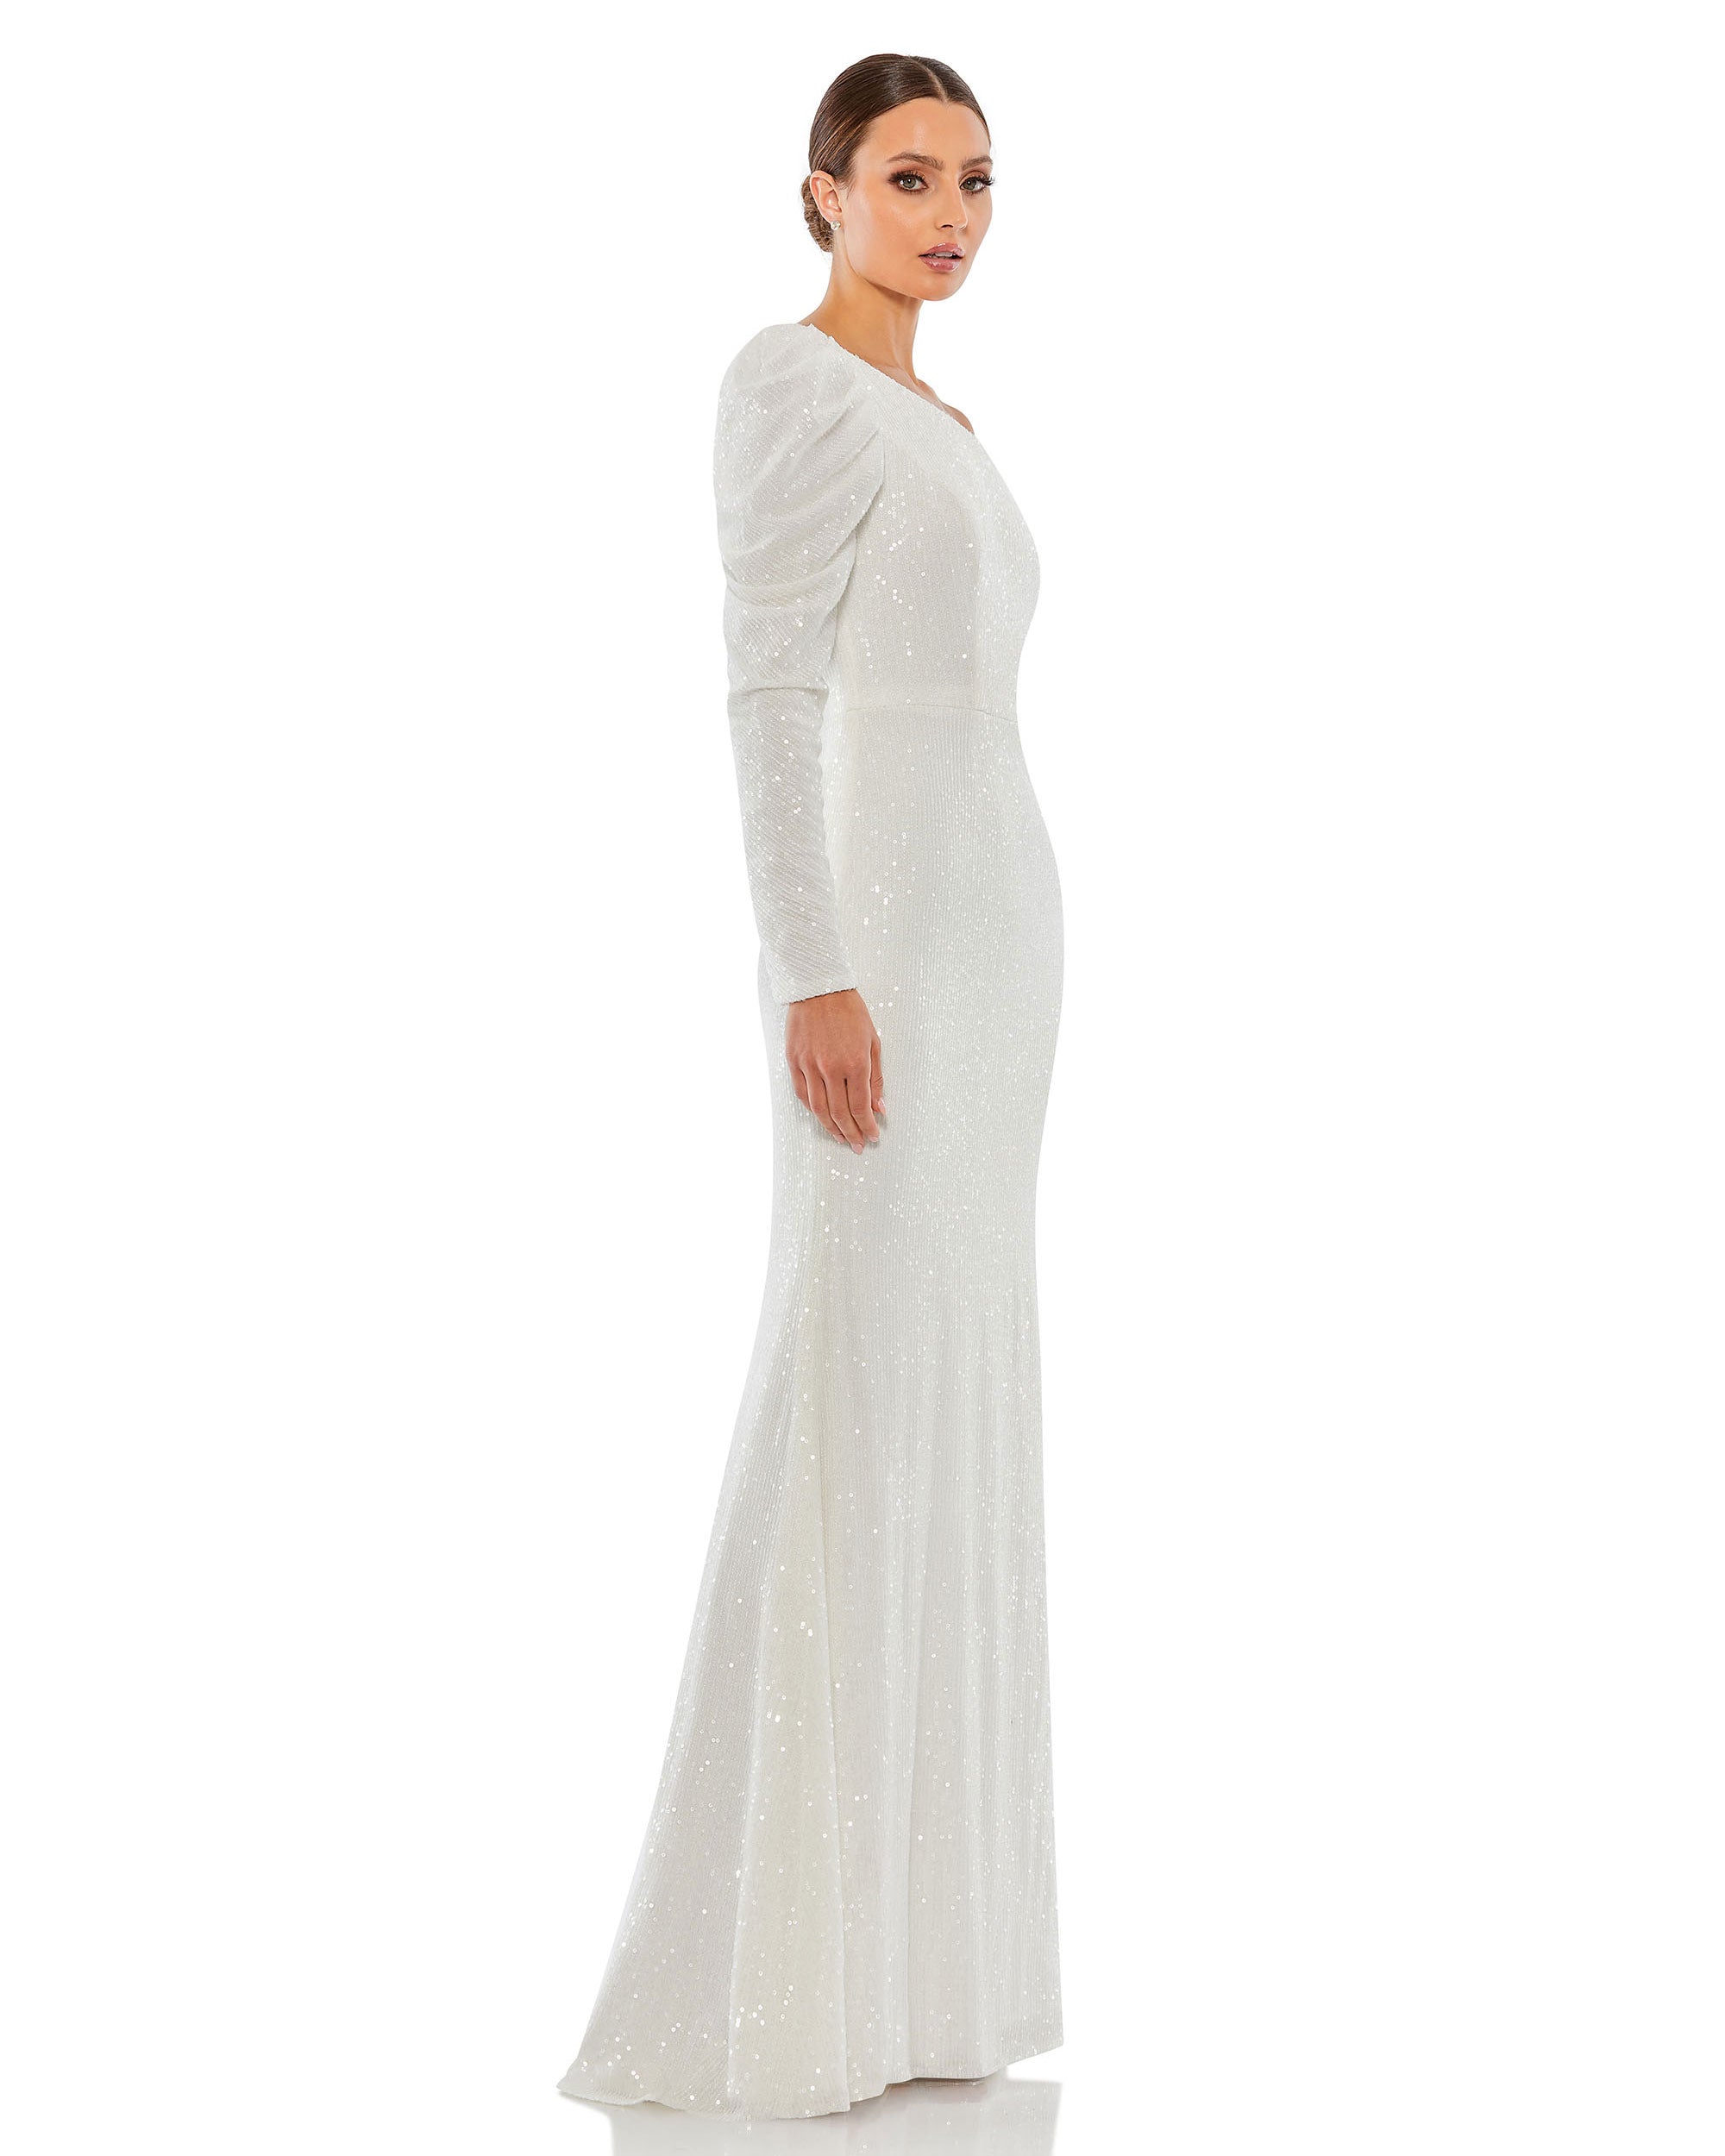 Sequined One Shoulder Trumpet Gown - FINAL SALE